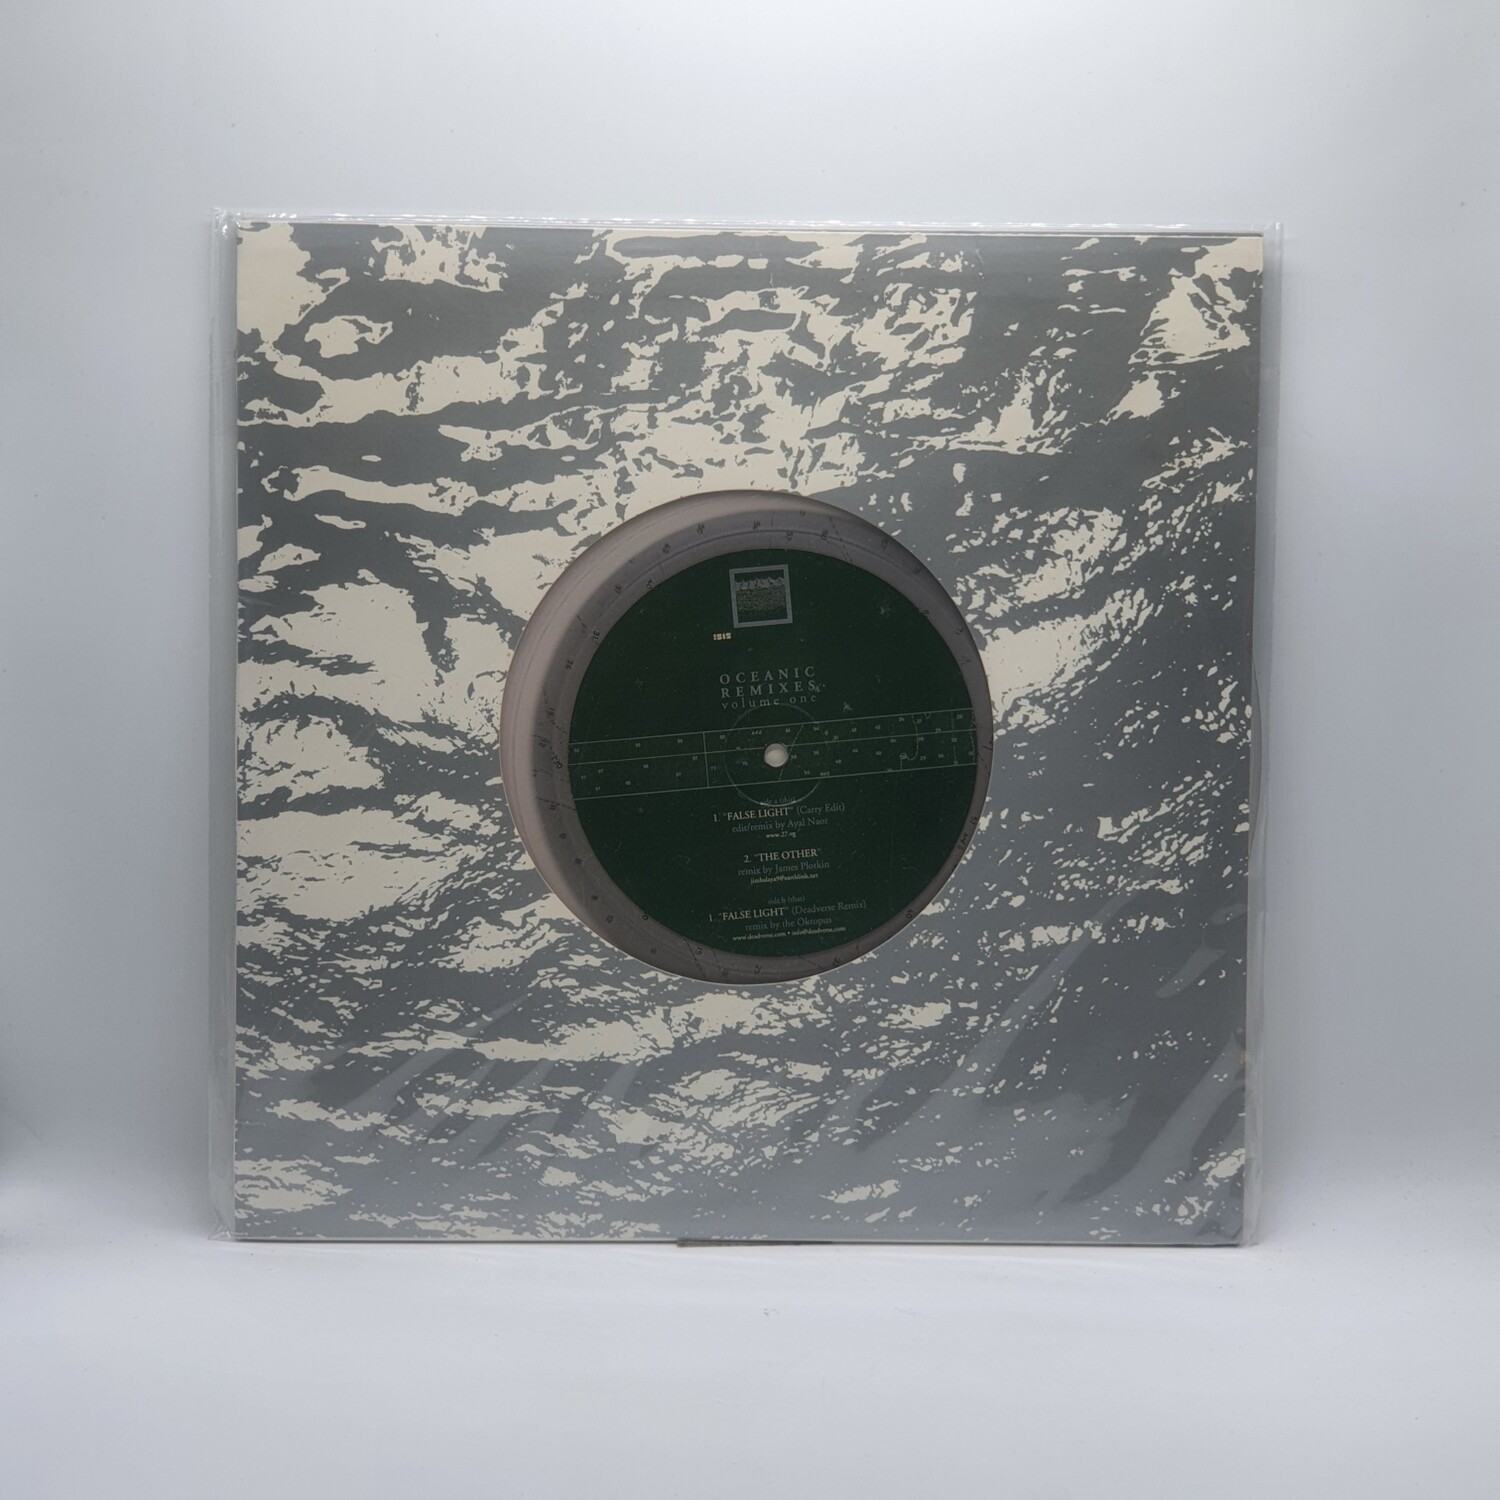 [USED] ISIS -OCEANIC REMIXES VOLUME ONE- 12 INCH EP (CLEAR VINYL)